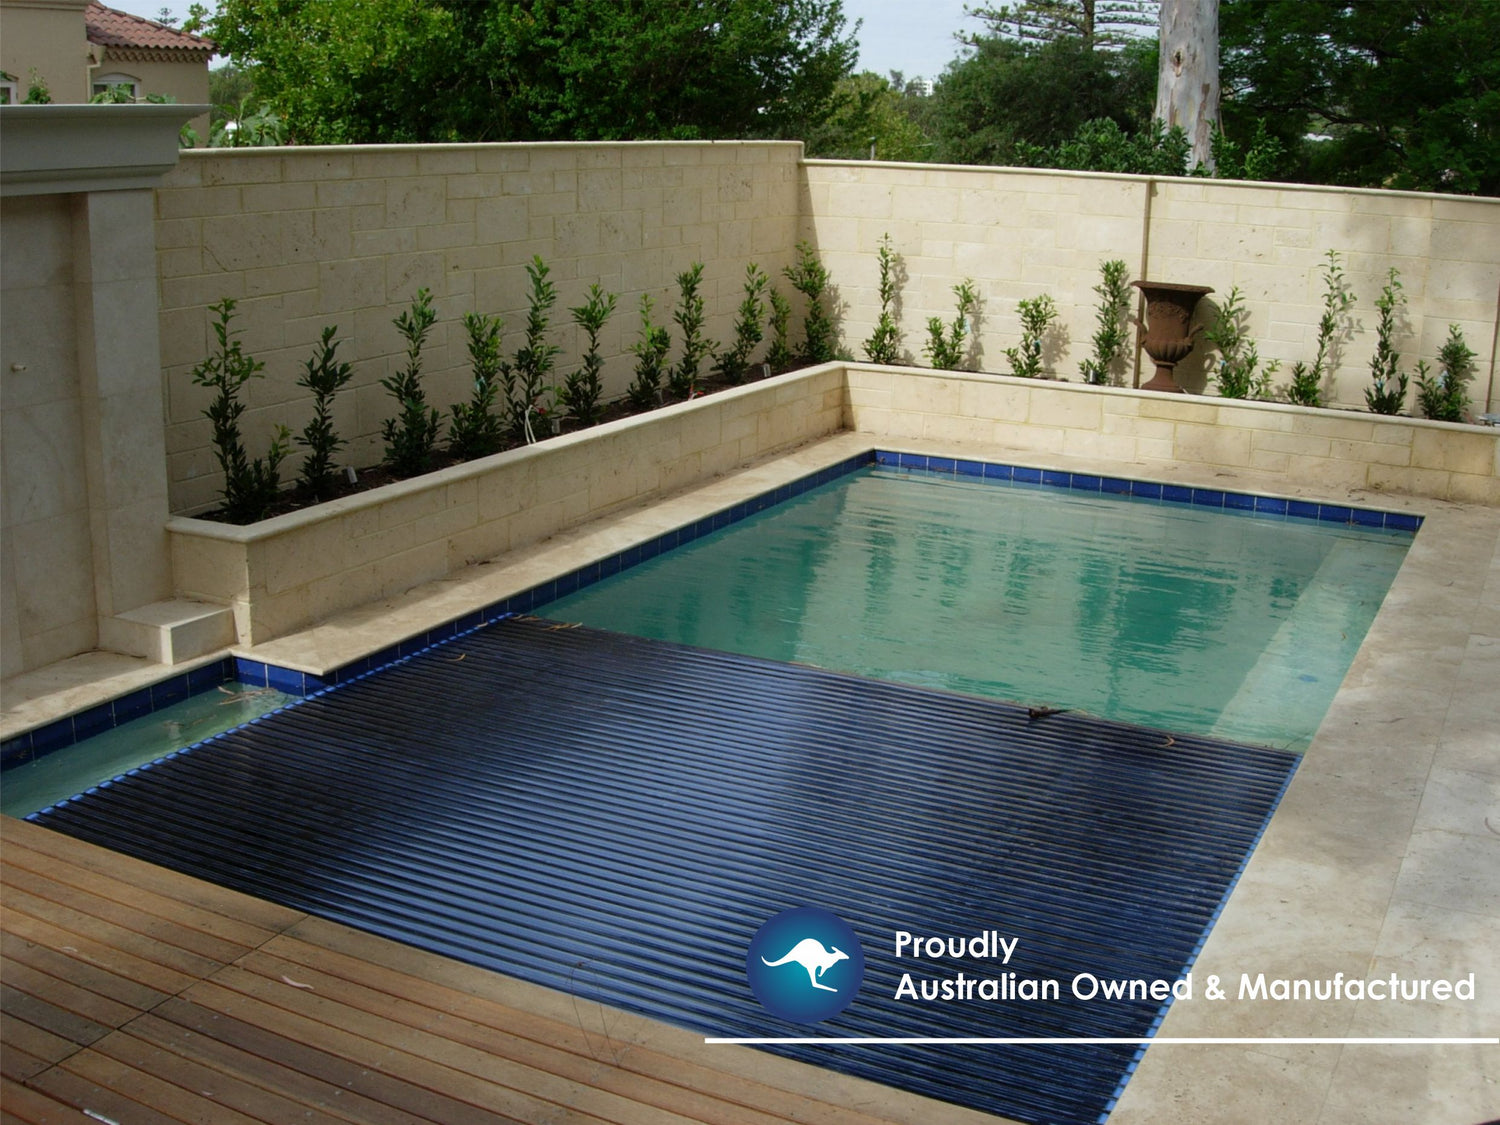 Pool Covers made in Australia by Australians